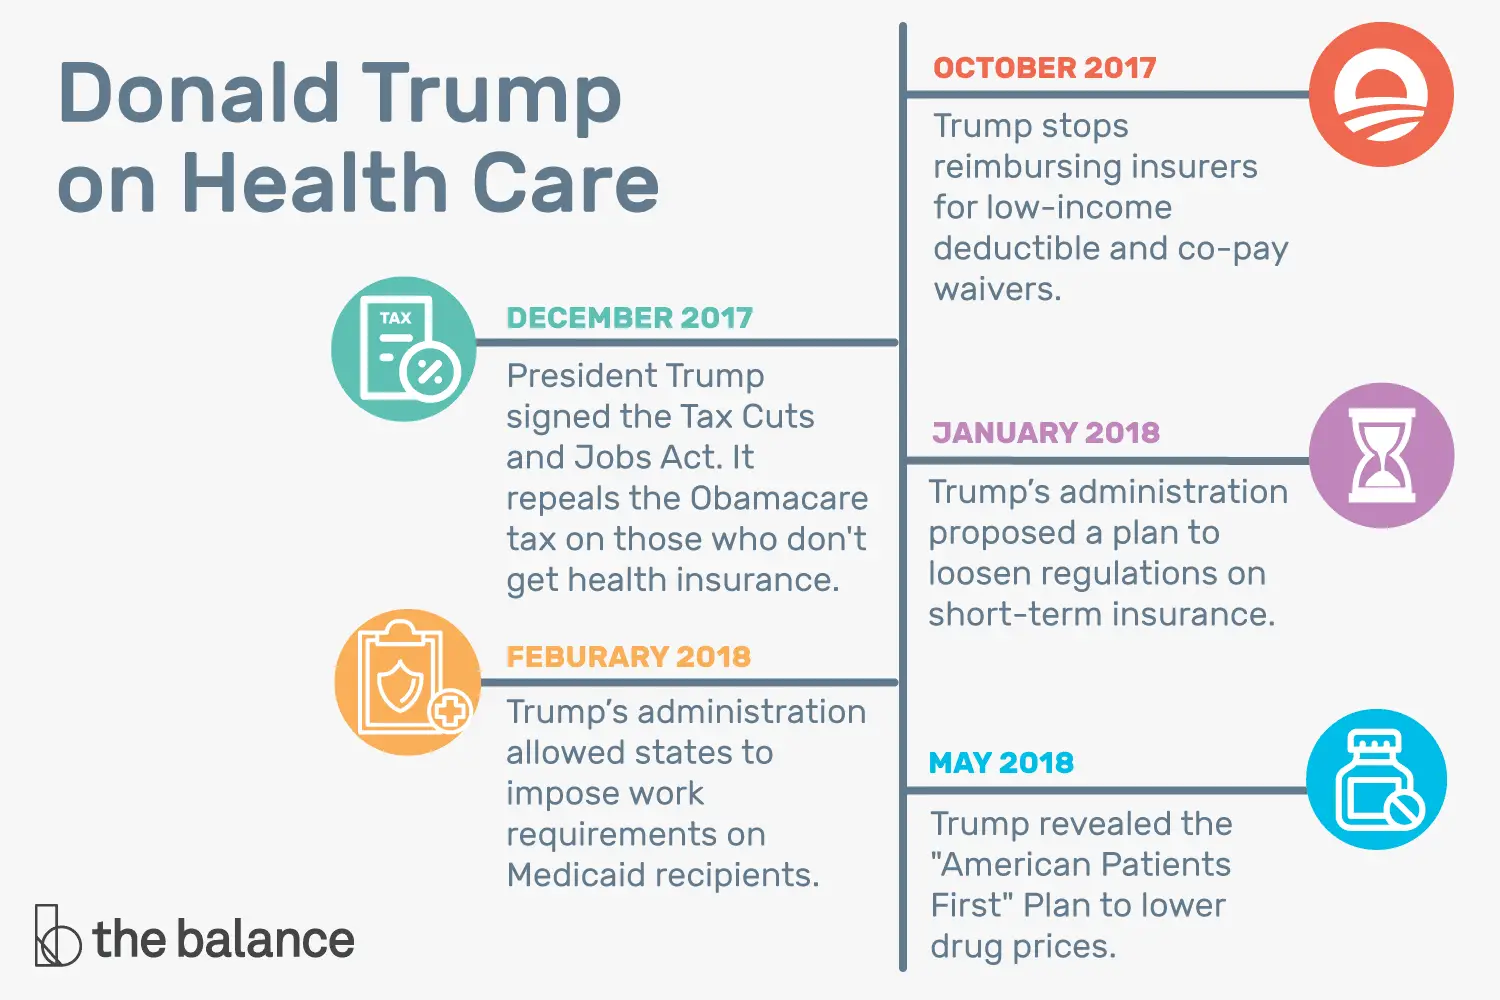 Donald Trump on Health Care: Consequences of His Plan